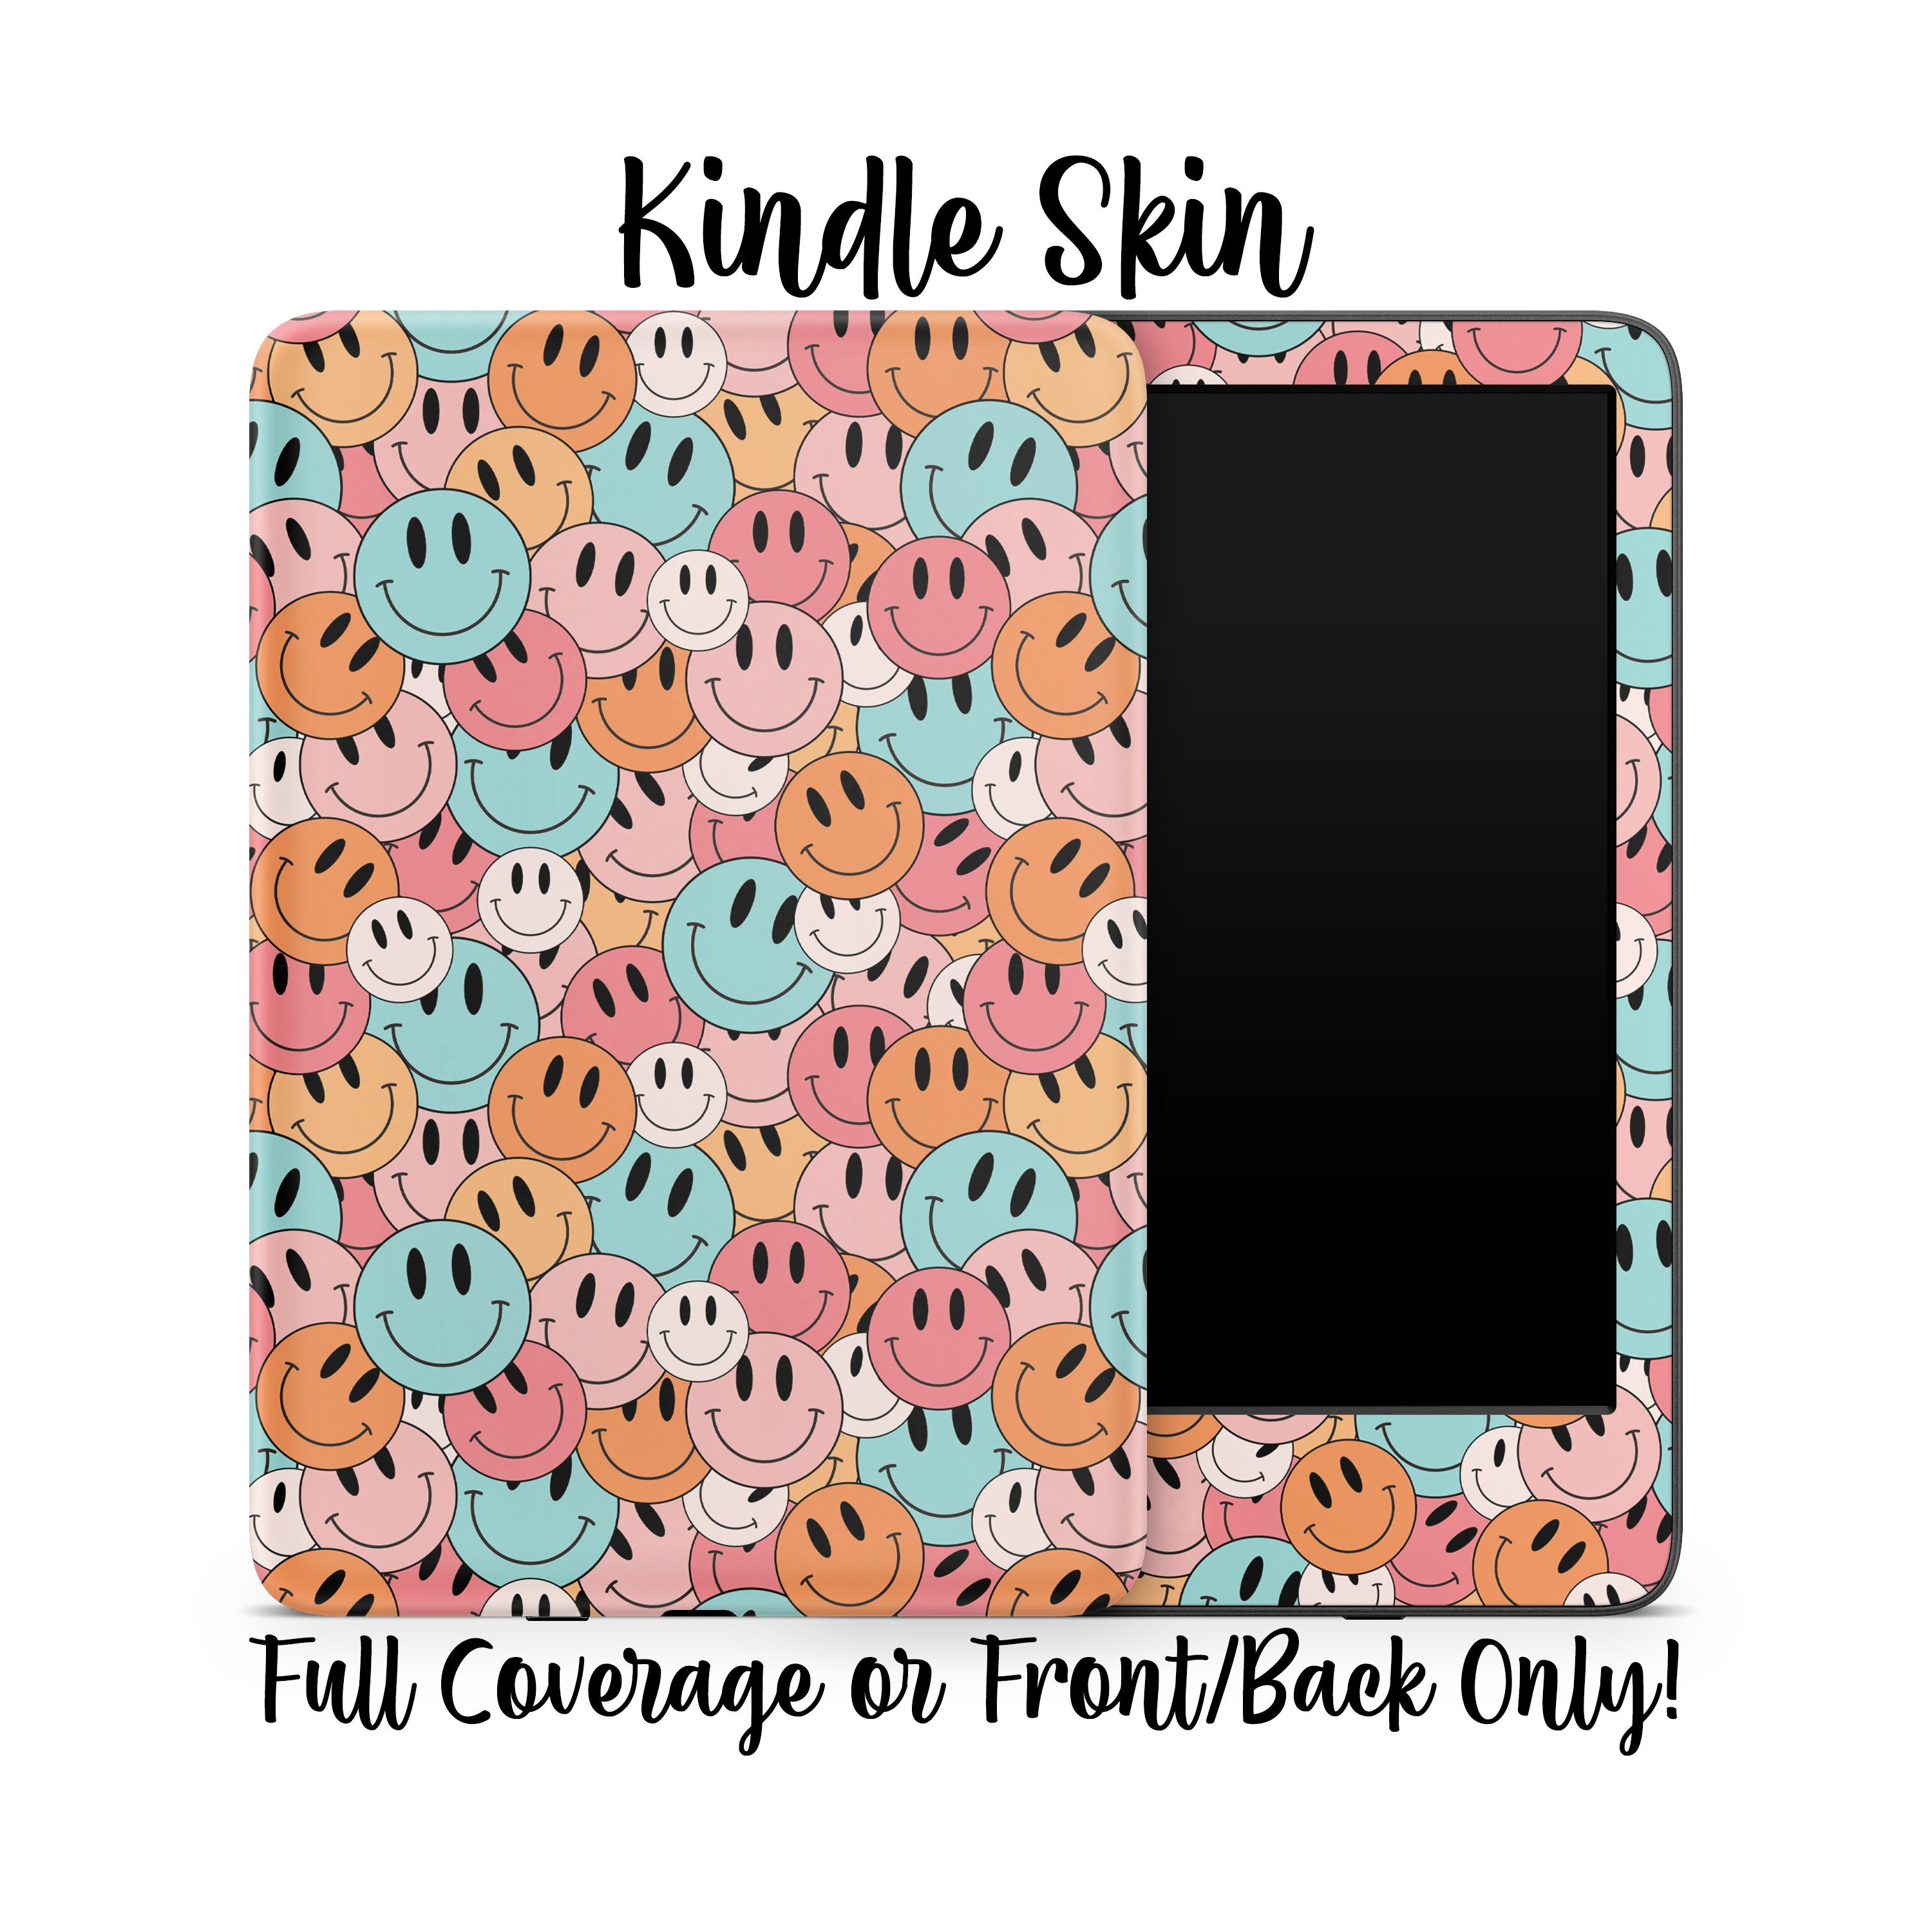 Green Envy Kindle Sticker Pack Sticker Pack – Lux Skins Official